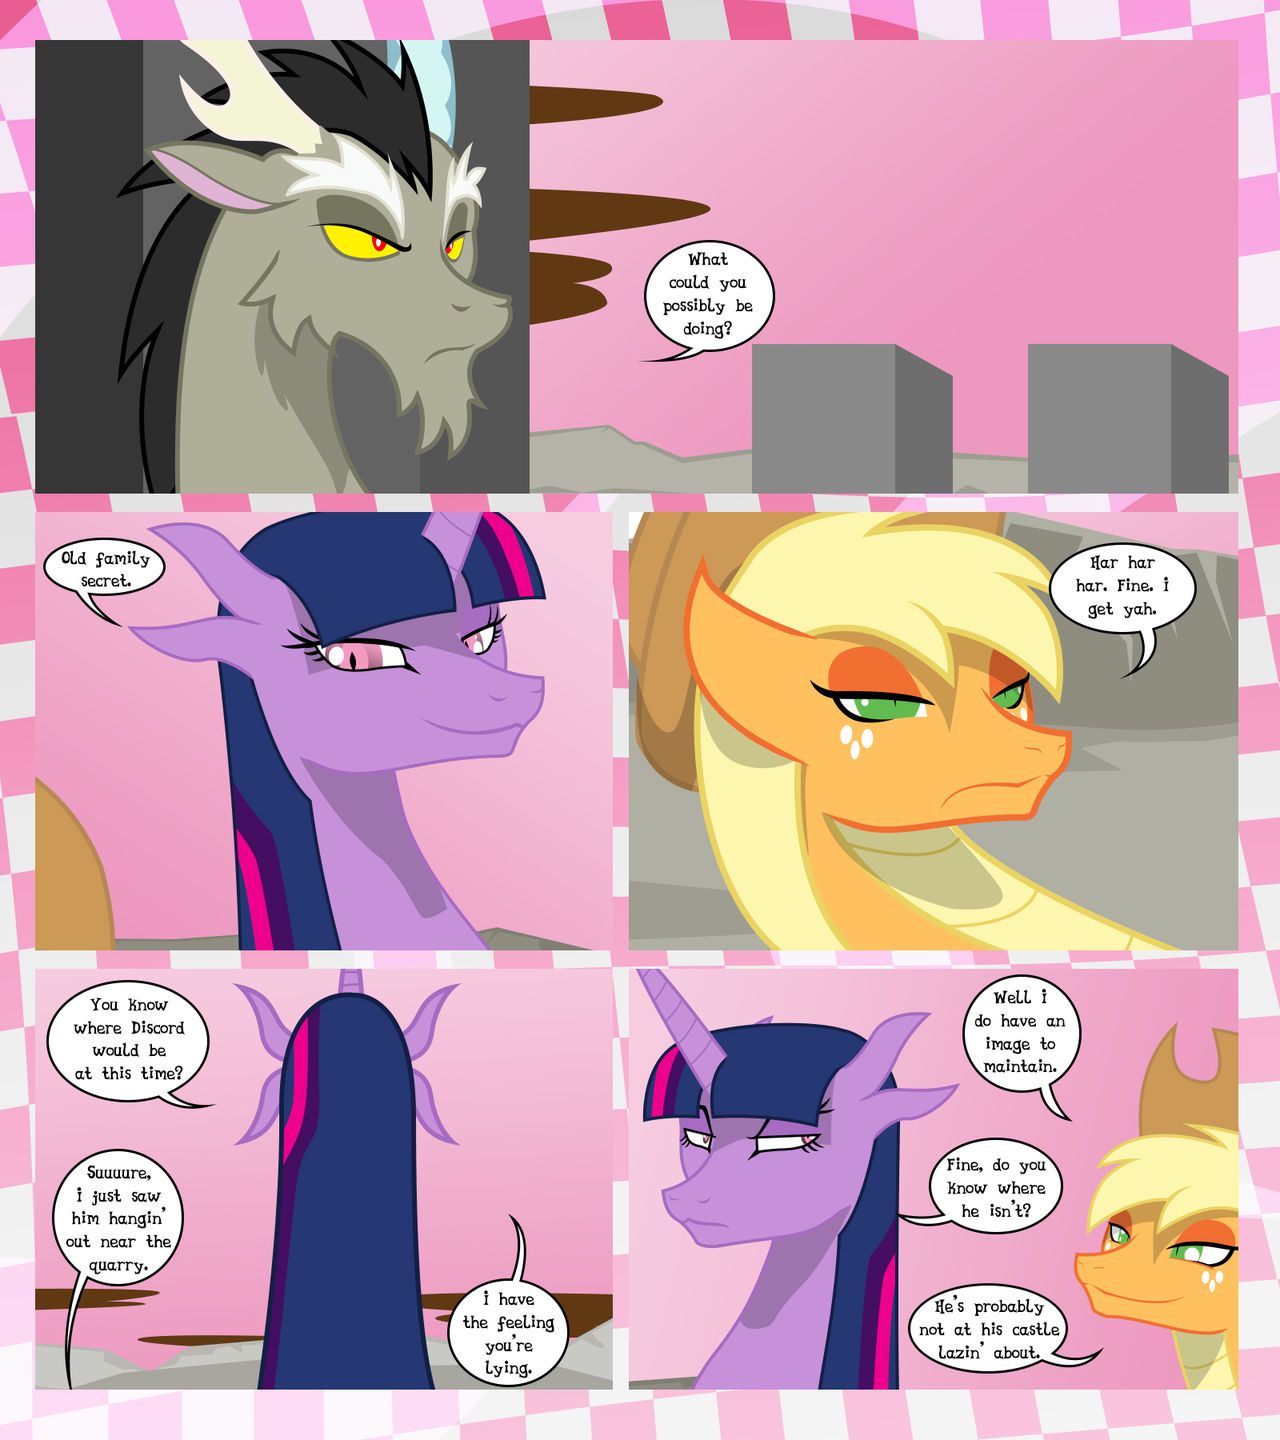 [GatesMcCloud] Cutie Mark Crusaders 10k: Chapter 3 - The Lost (My Little Pony: Friendship is Magic) [English] [Ongoing] 69